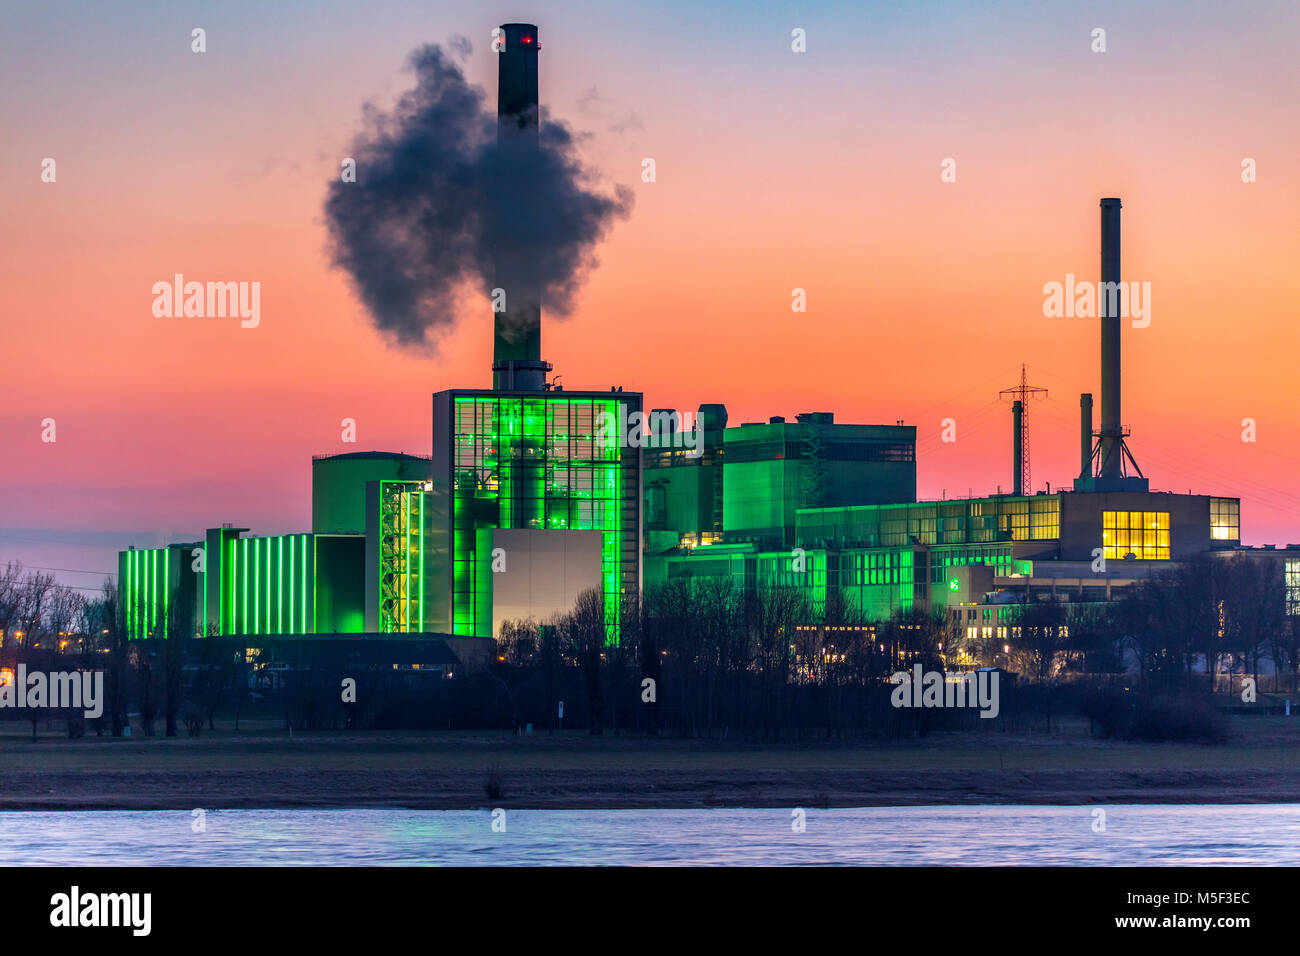 The Lausward power plant in Dusseldorf, gas and steam turbine power plant  operated by Stadtwerke Düsseldorf and EnBW, in the port of Dusseldorf on  the Stock Photo - Alamy